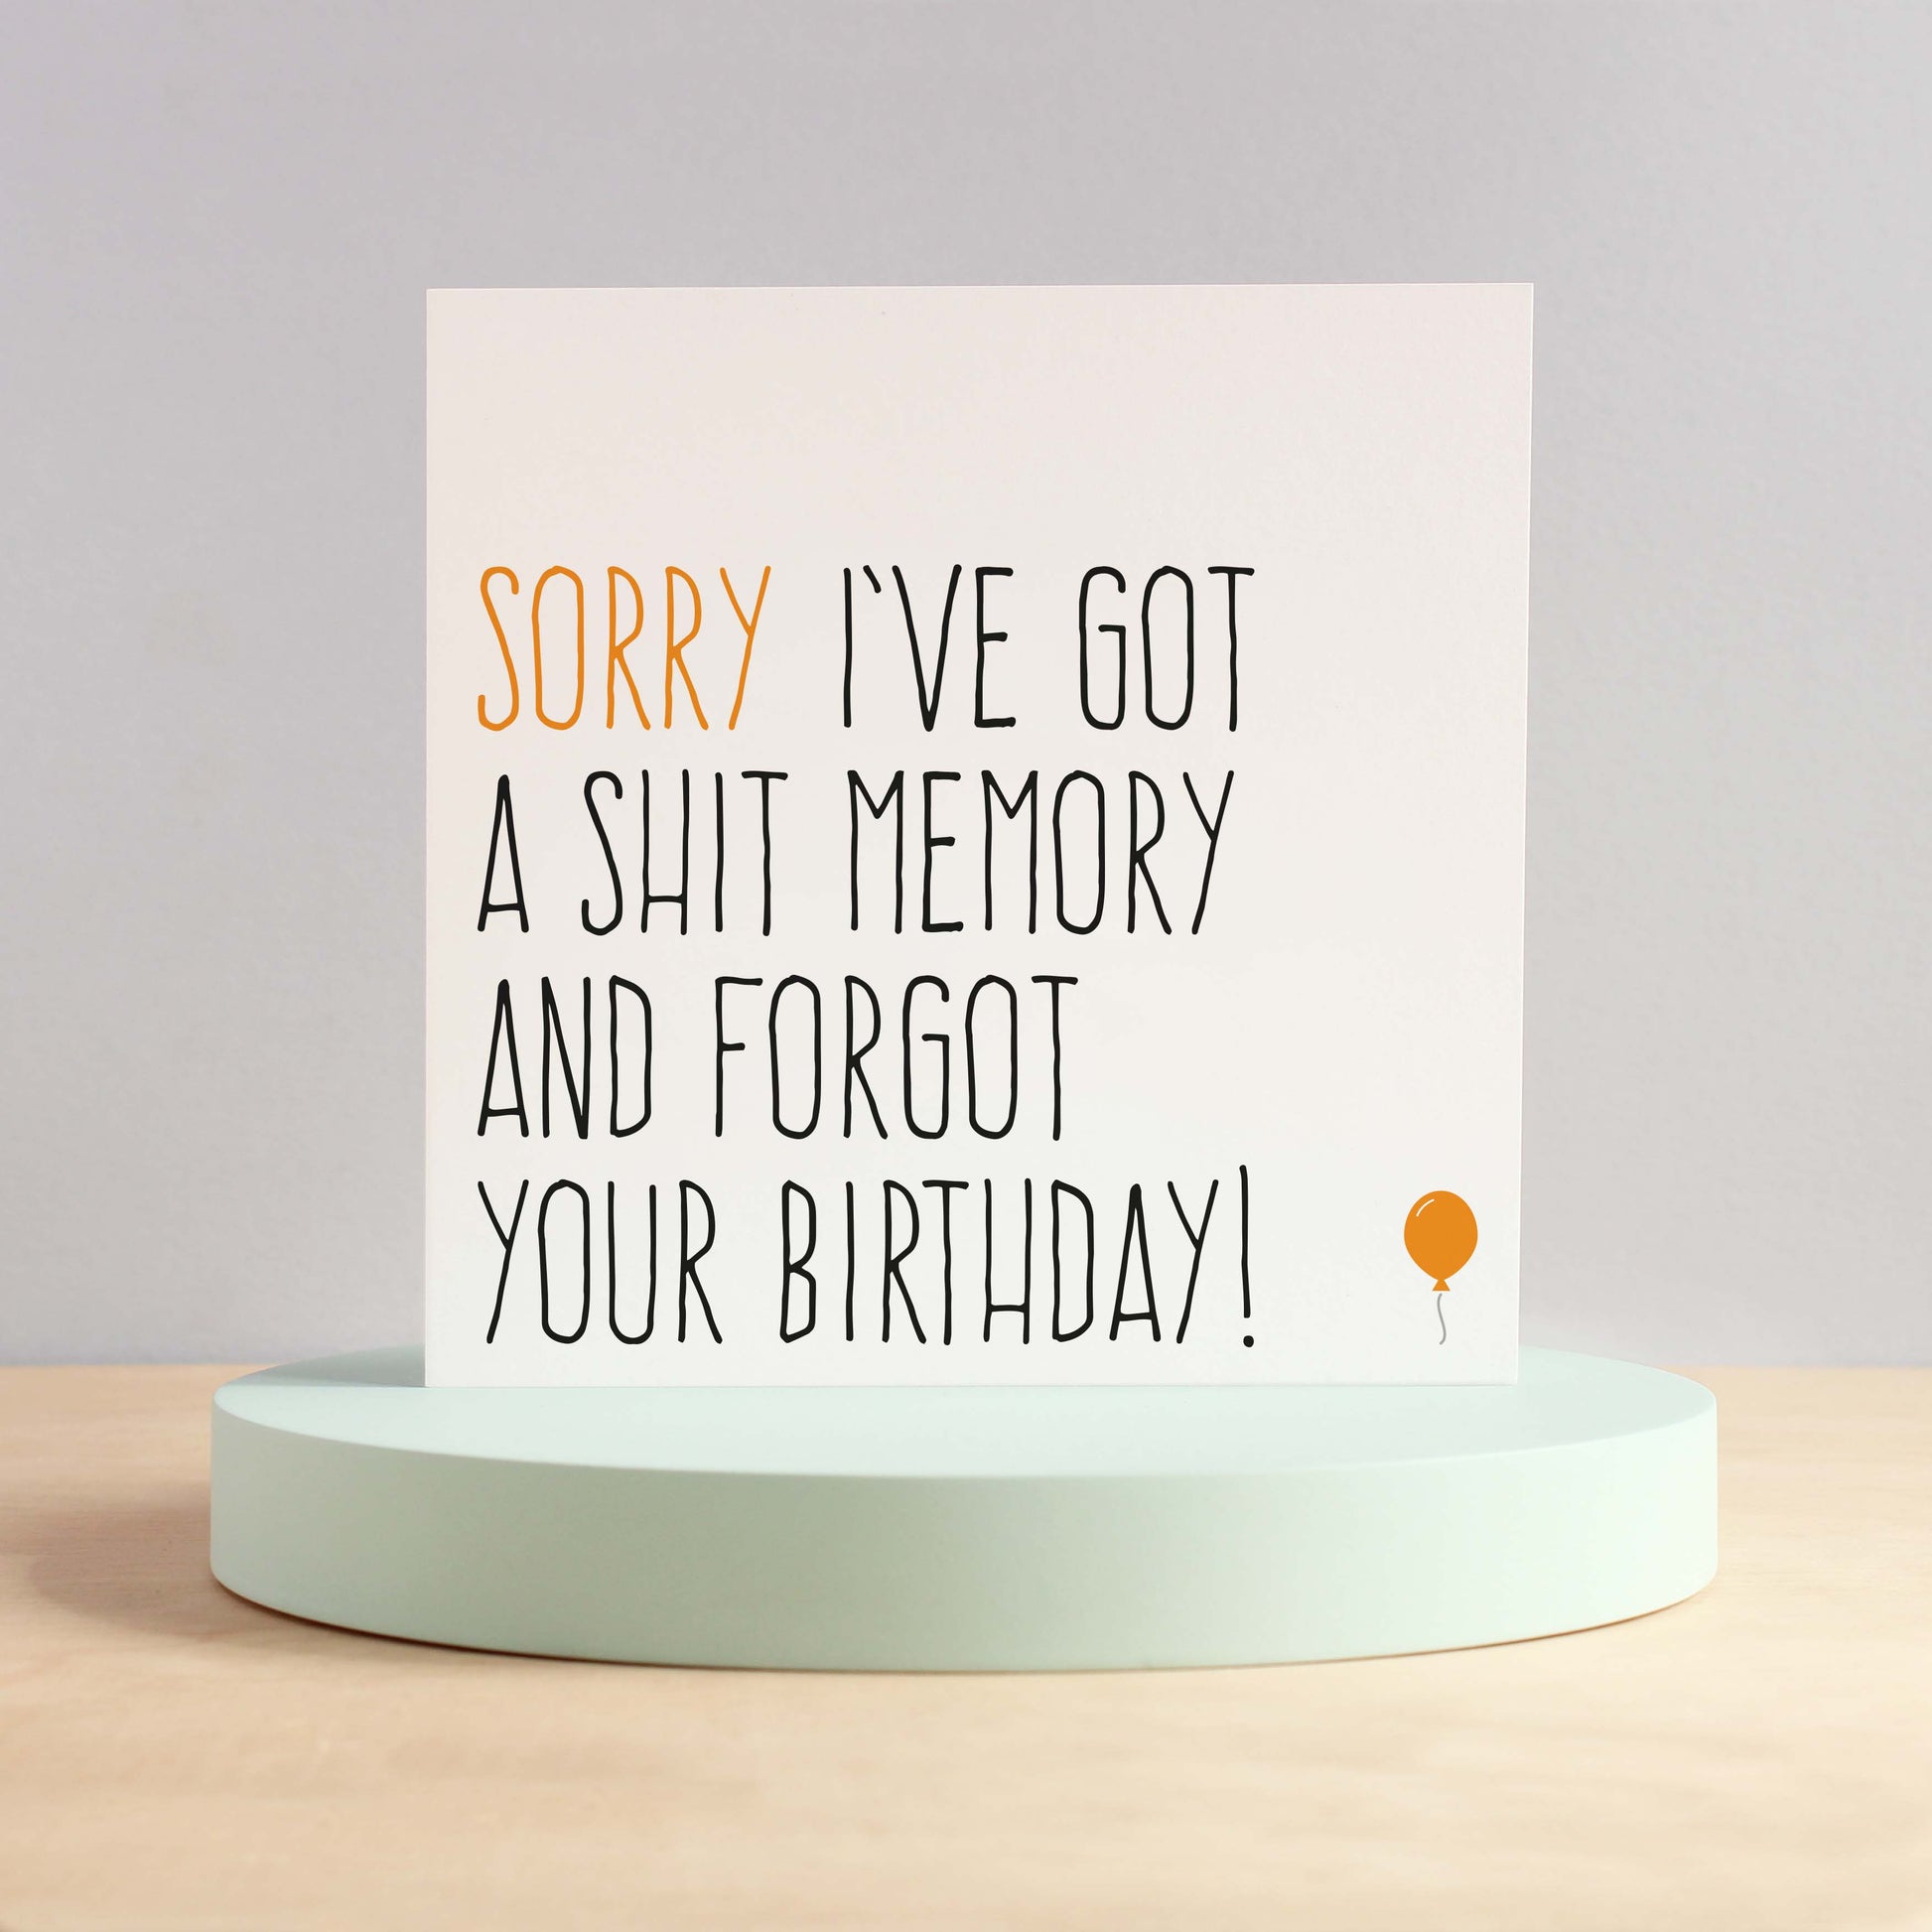 Sorry I've got a shit memory belated birthday card from Purple Tree Designs